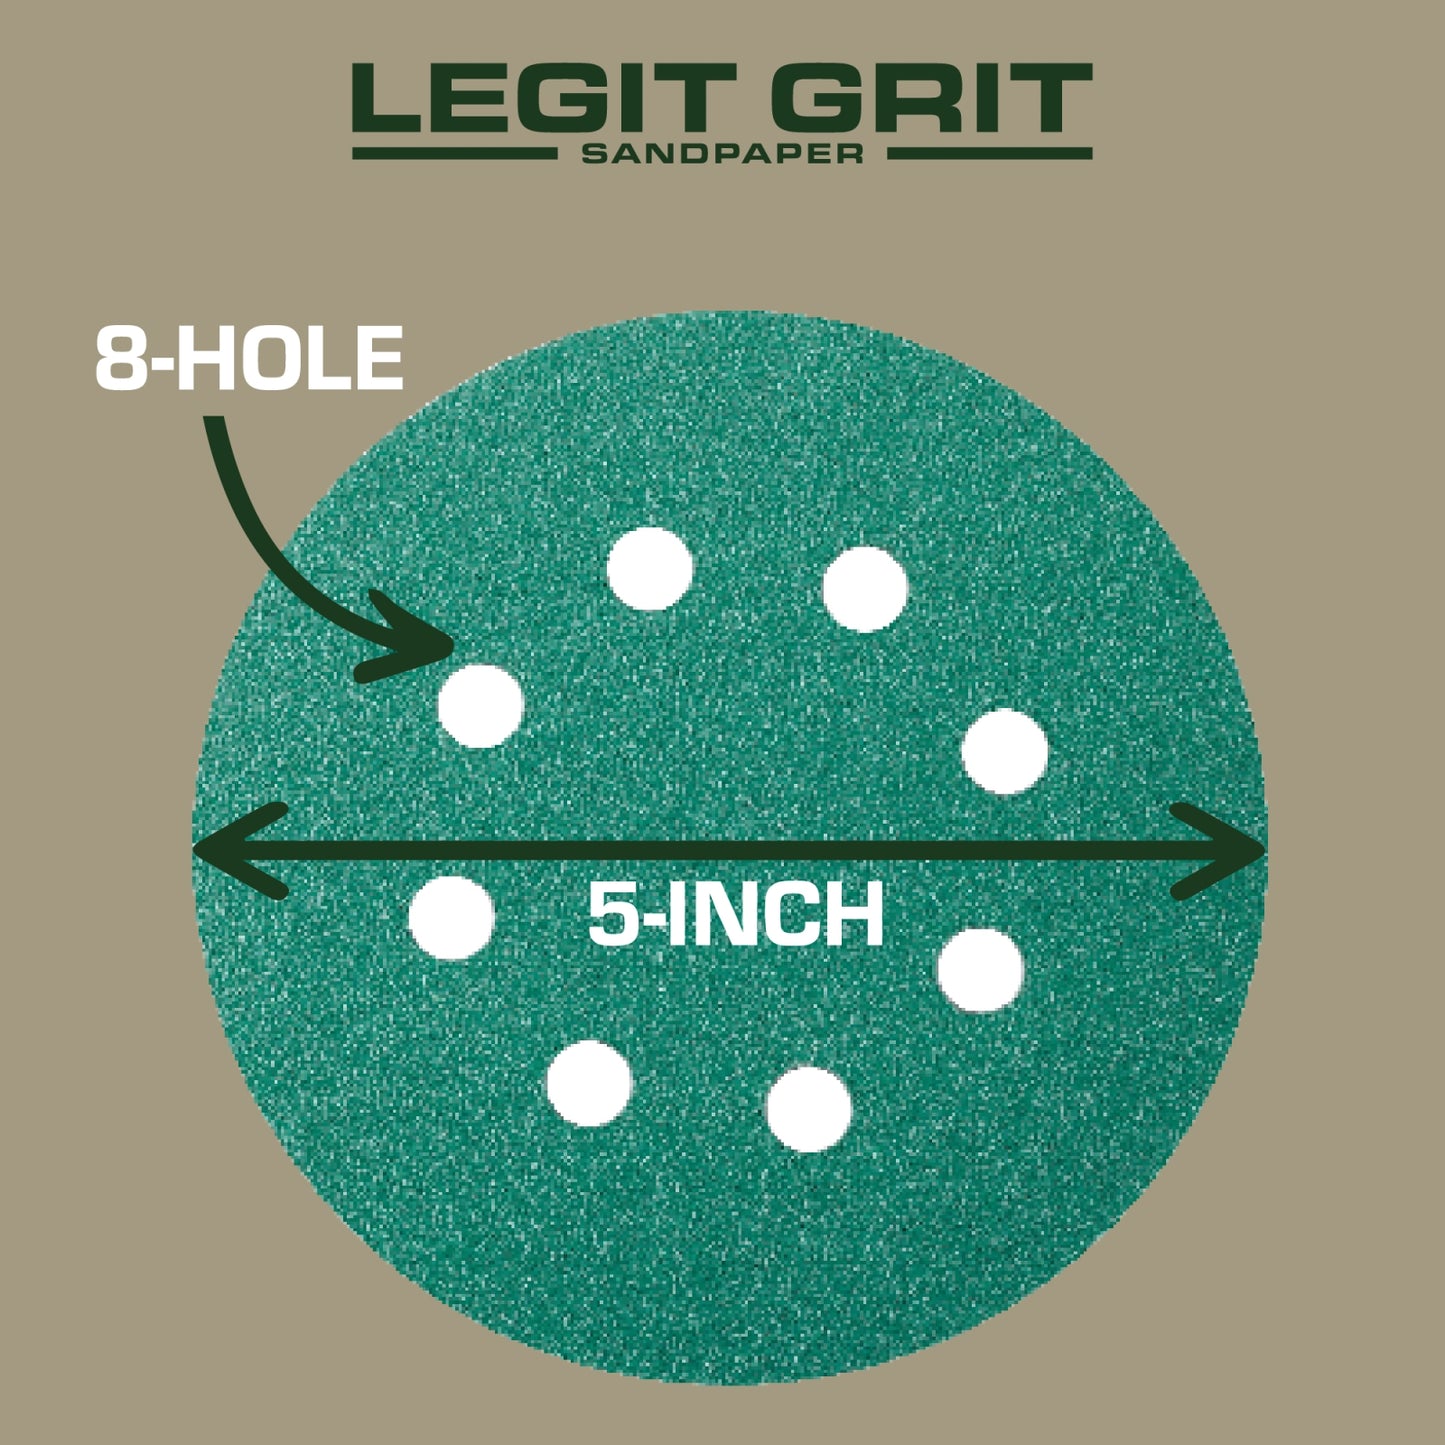 Legit Grit 5 Inch  Sand paper Disc, 8-Hole, Mixed Grit - Sample Pack,  GRITS: 80/120/150/180/220 (2 of each) 10 Pack